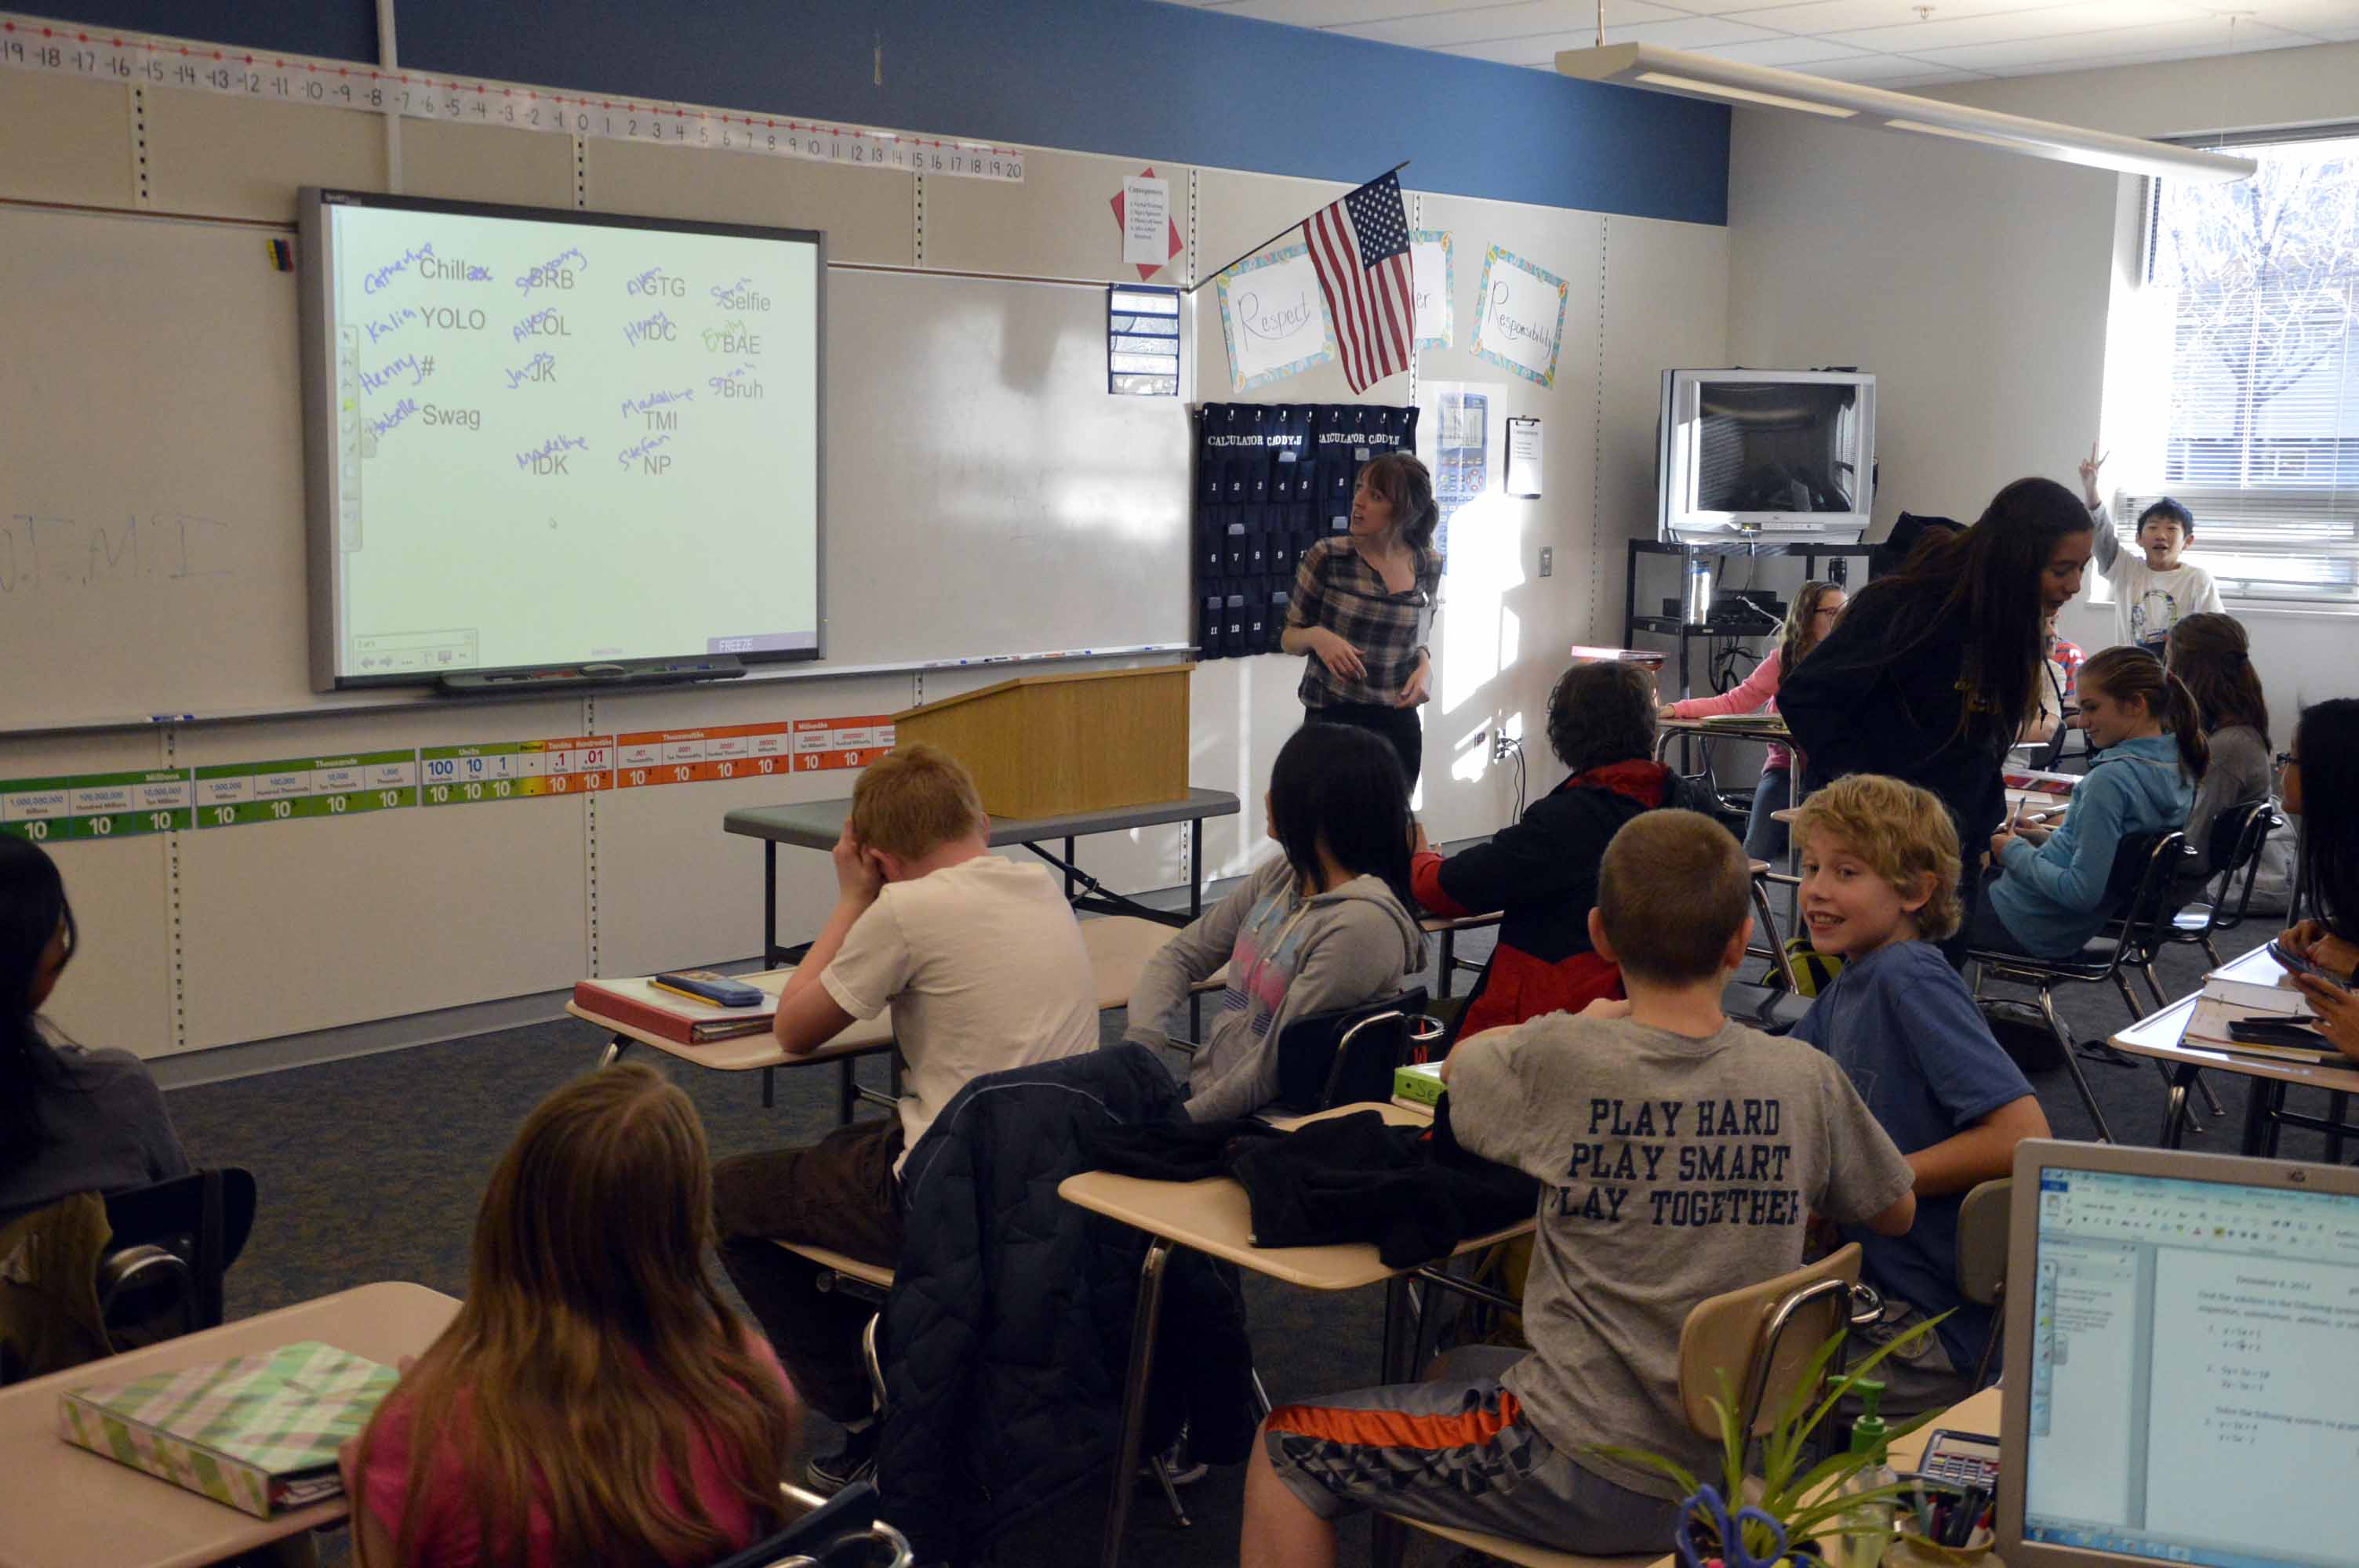 Wasatch Jr. High uses student-led workshops to reach out to community members